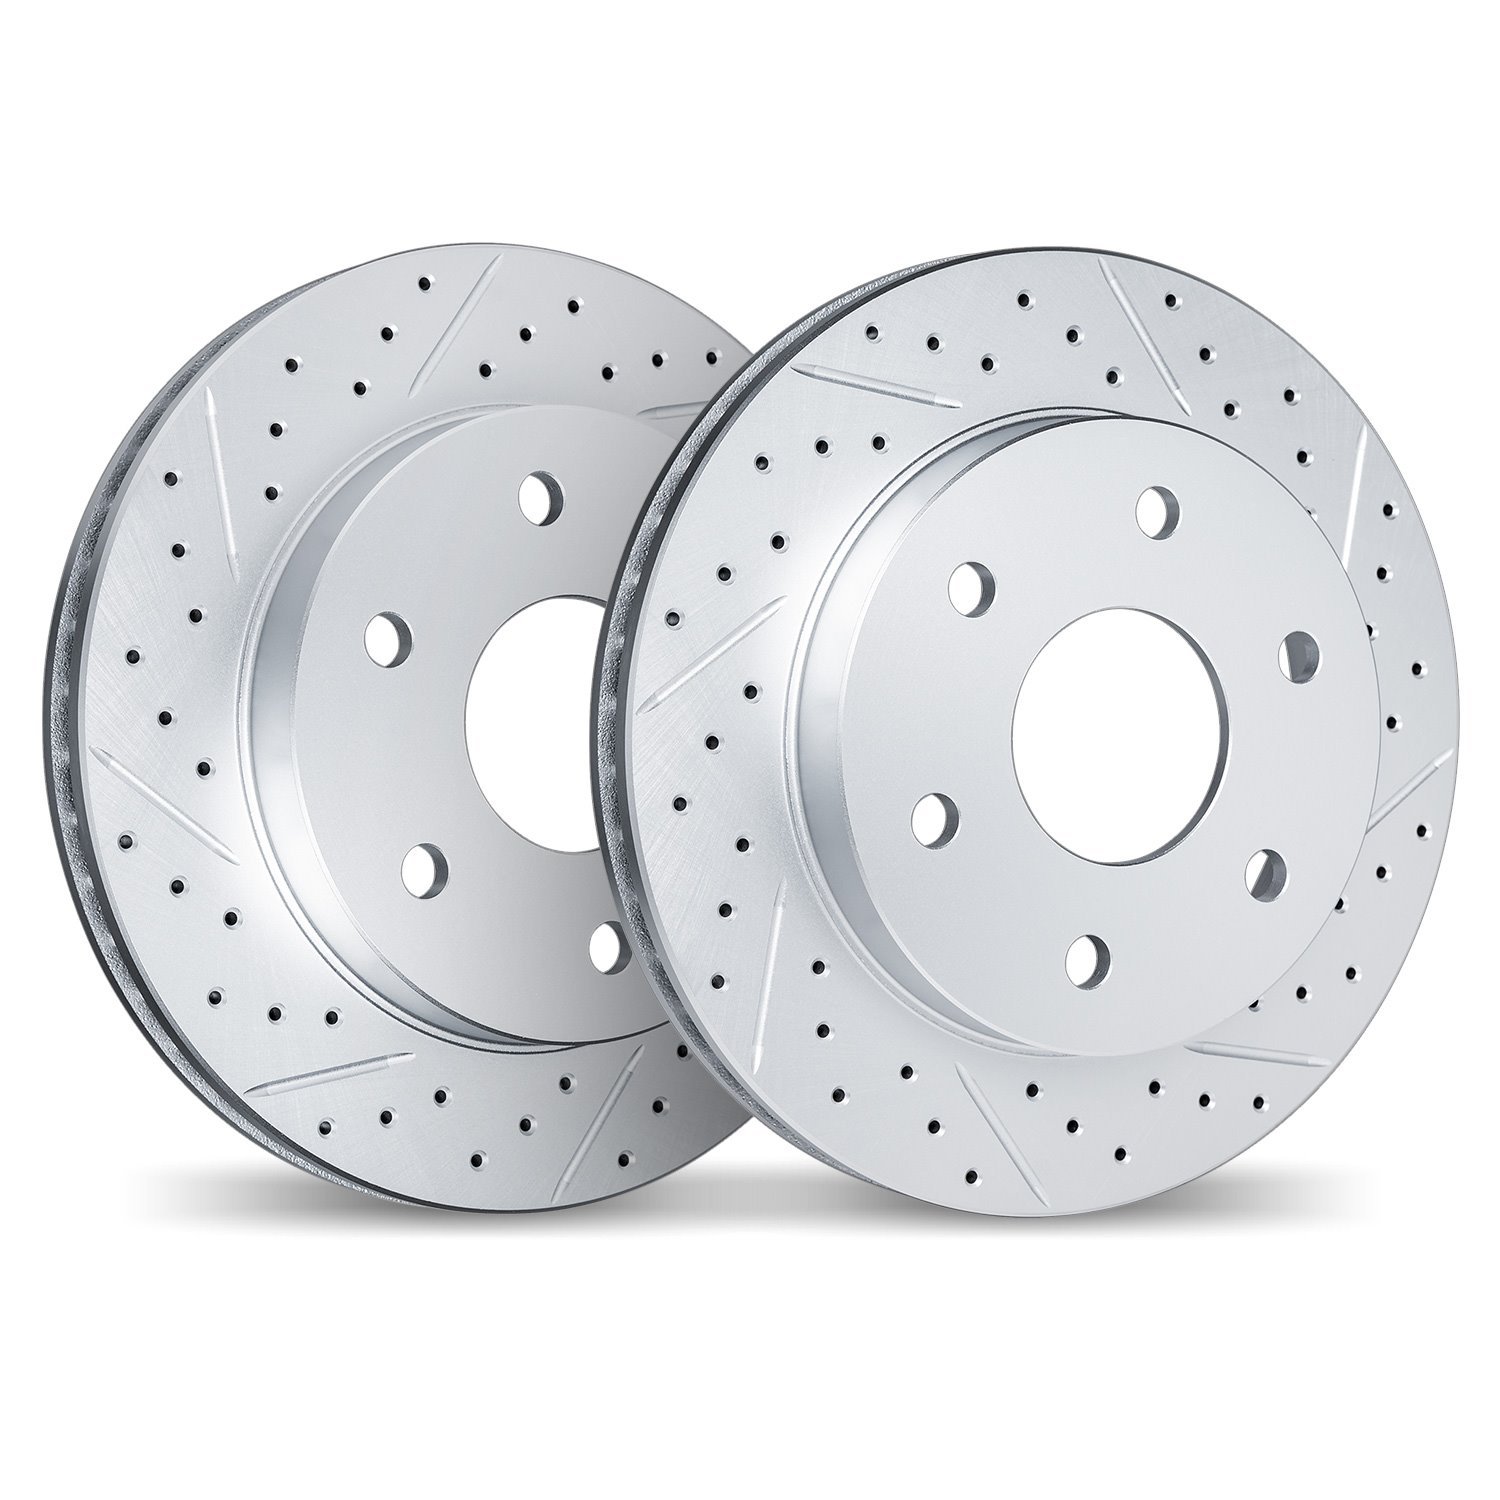 2002-47043 Geoperformance Drilled/Slotted Brake Rotors, Fits Select GM, Position: Rear